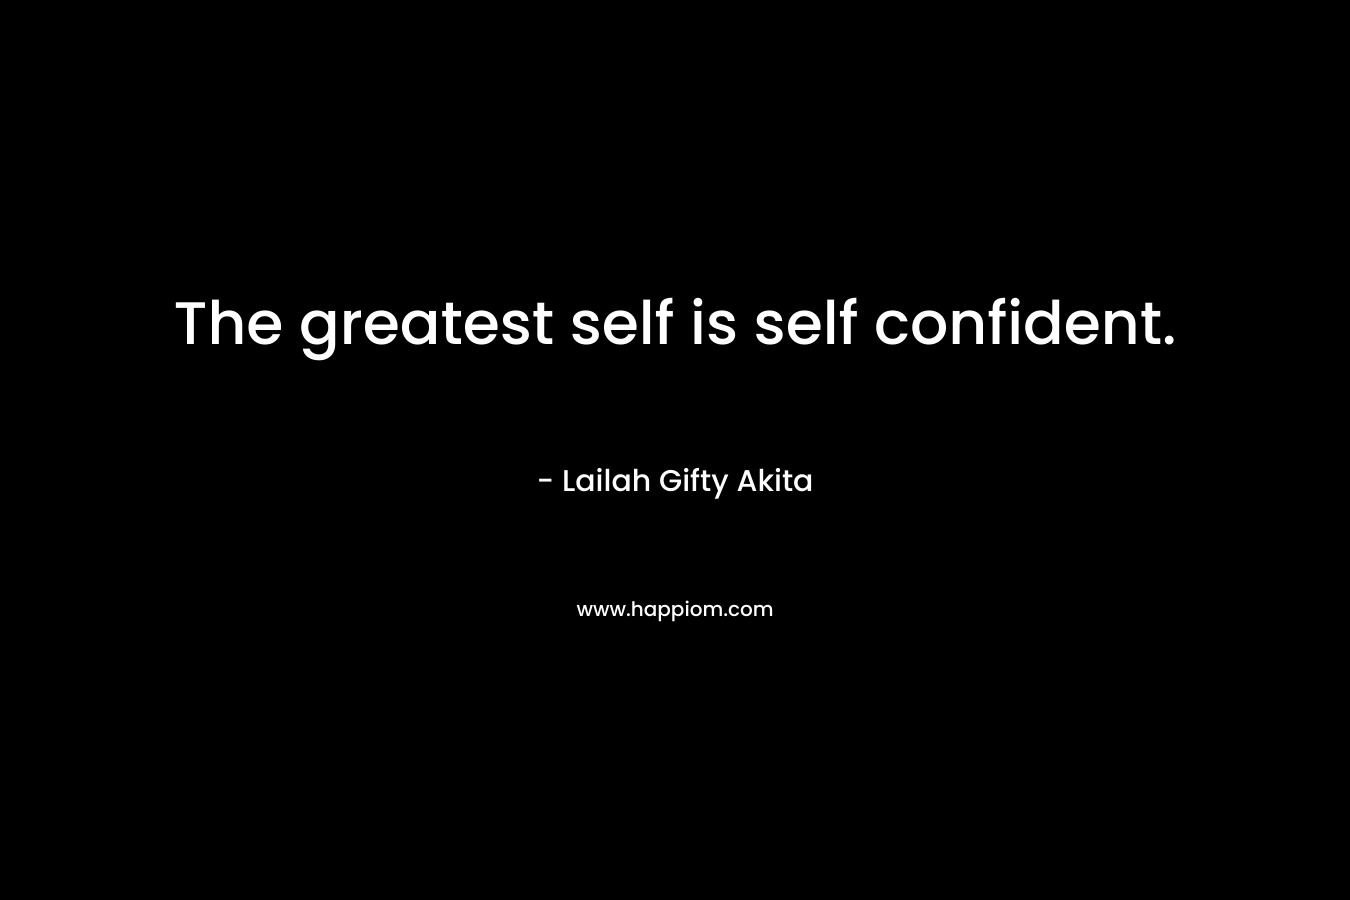 The greatest self is self confident.